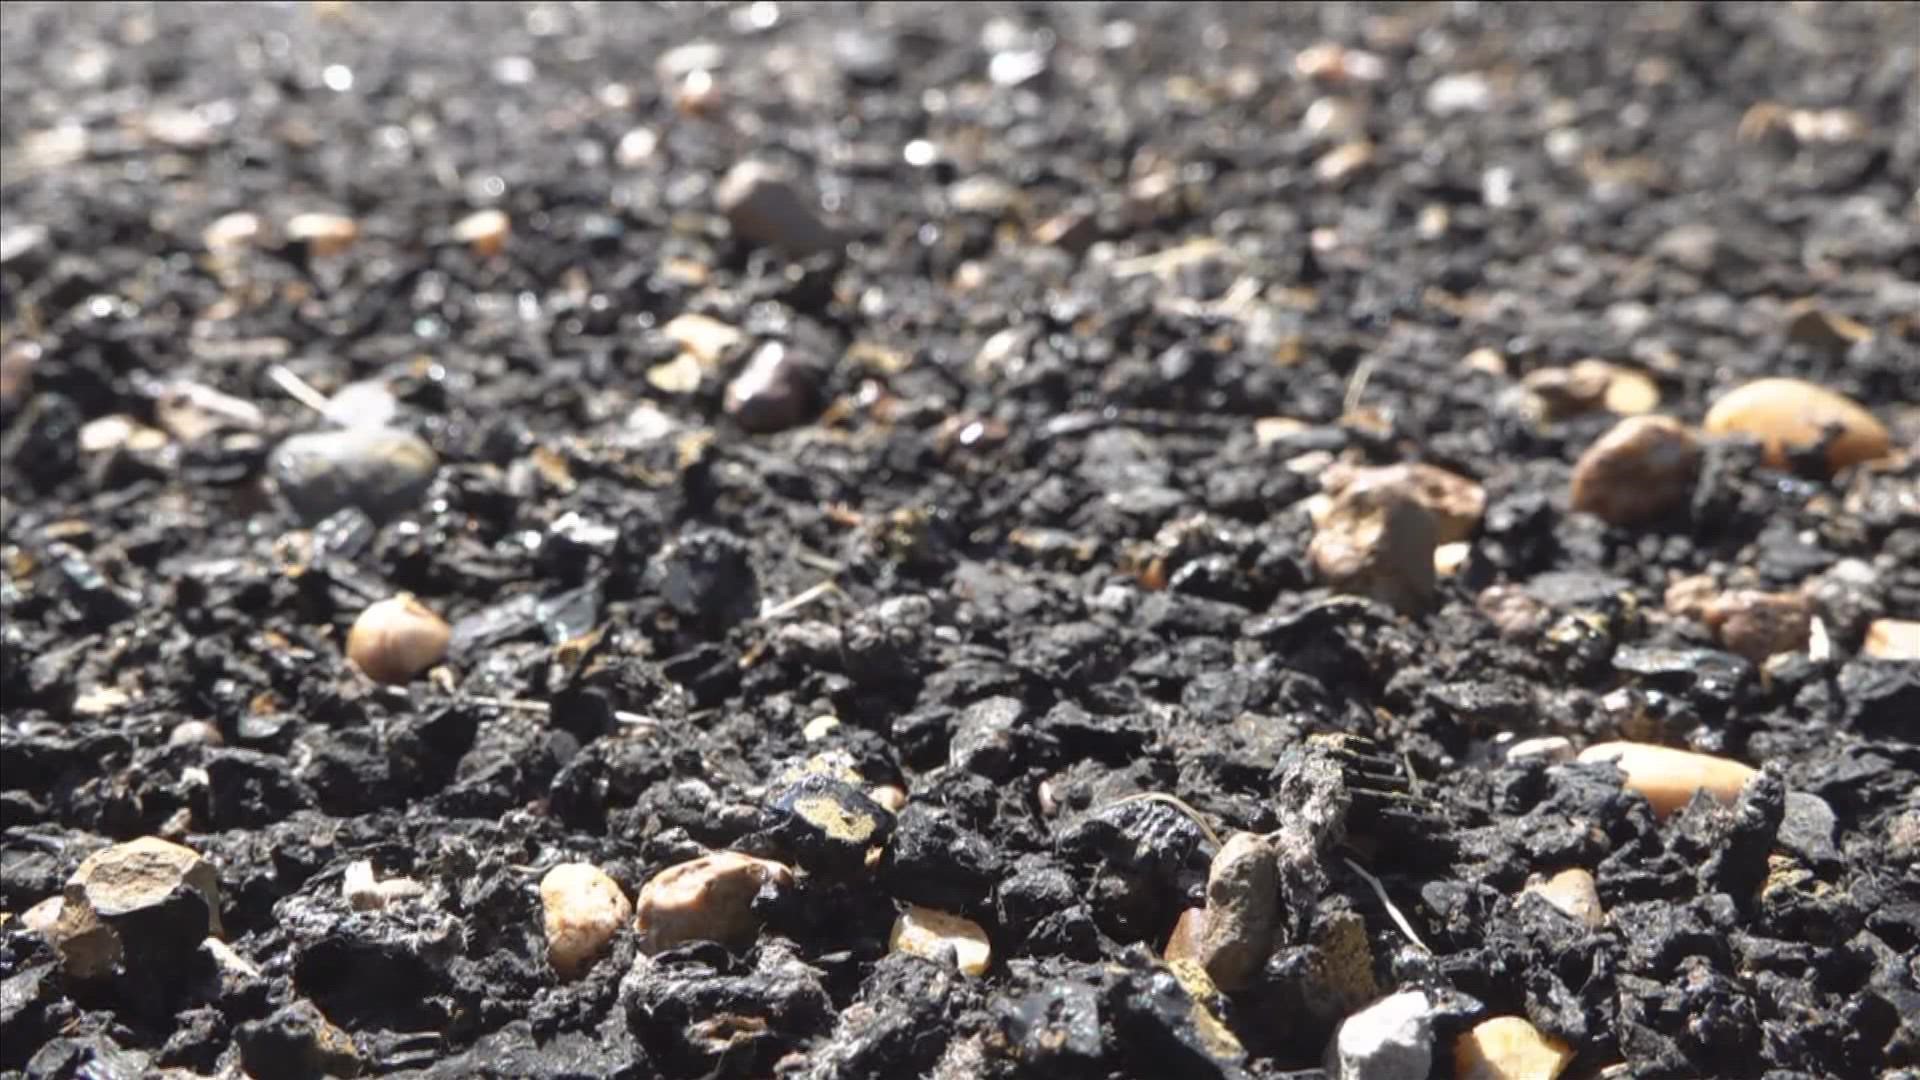 The trail is more than 2.5 miles long and made from rubber crumbs made from old tires. Officials said it is one of the longest rubber-bearing trails in the U.S.